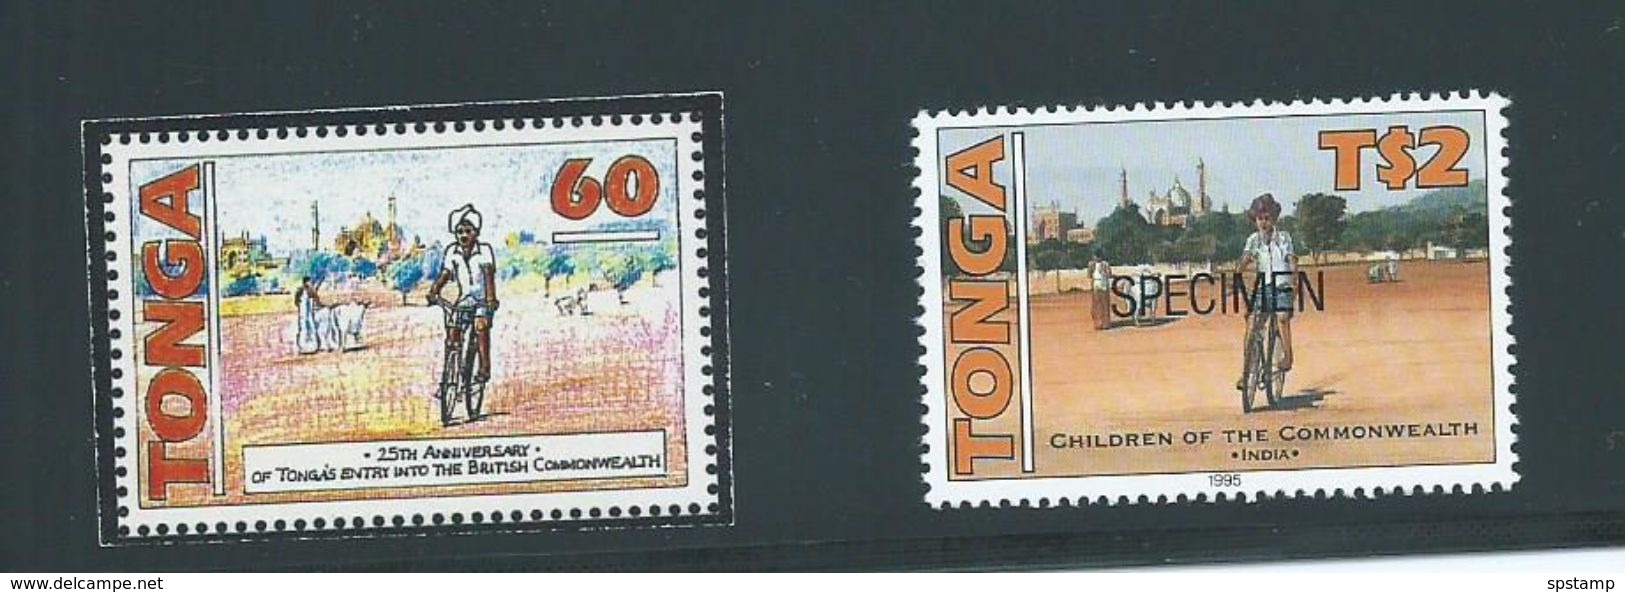 Tonga 1995 Commonwealth Children Bicycle Unadopted Essay For $2 Value - Tonga (1970-...)